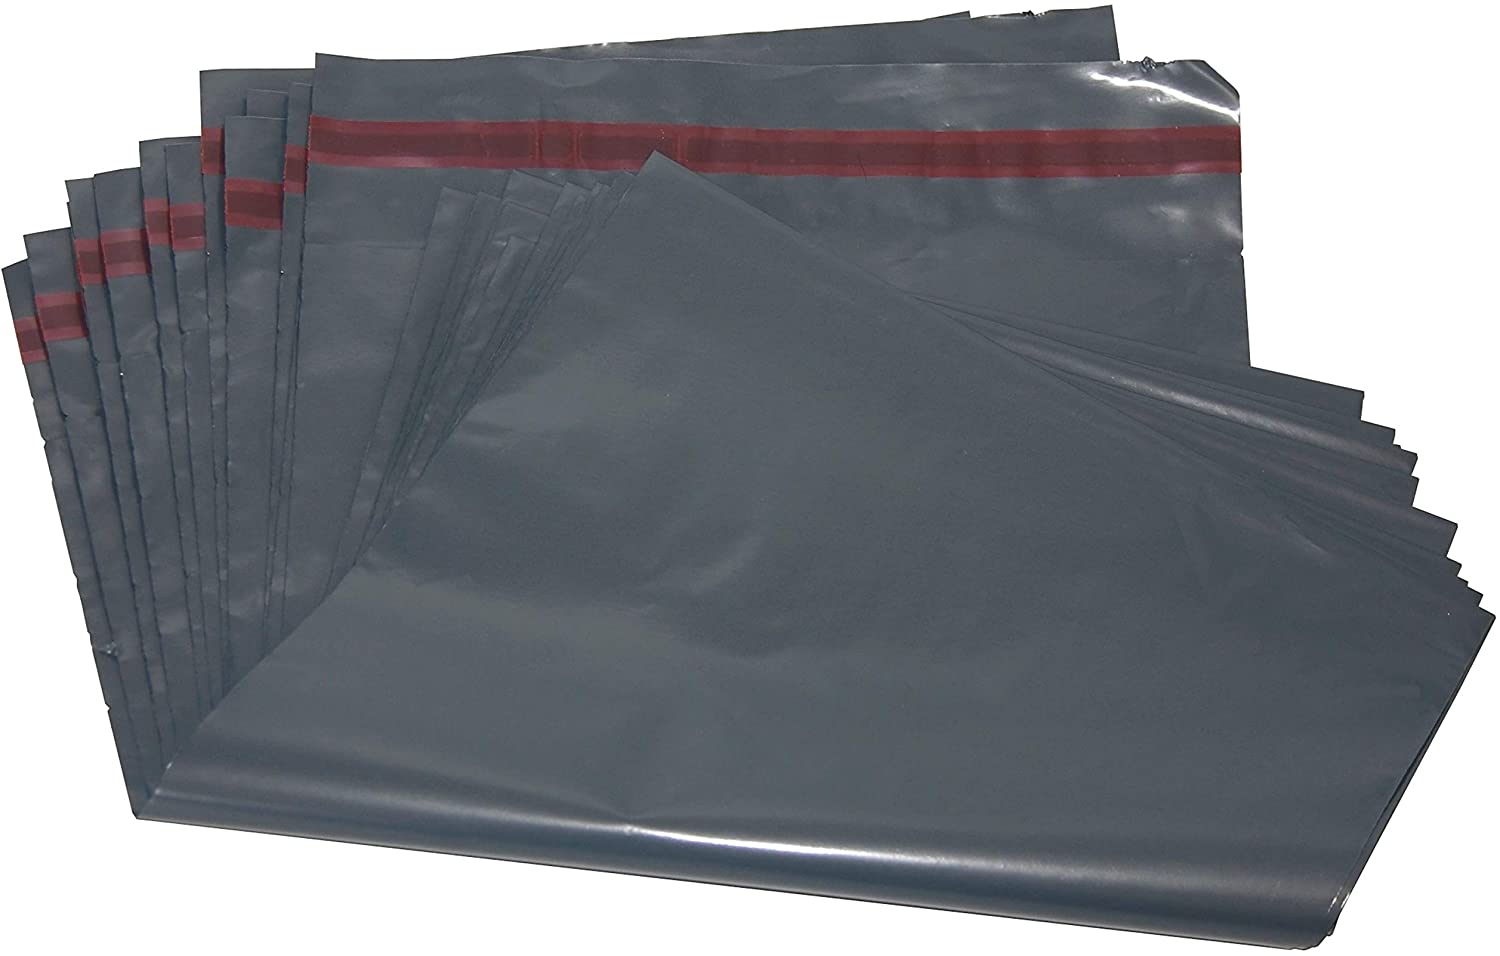 50 Mixed Grey Mailing Poly Postal Self Seal Bags 5 Sizes 10 from Each iSOUL Small to Large Mailing Bags Postage Packaging Assorted Mailers Posting Shipping Post Parcels Package Bags